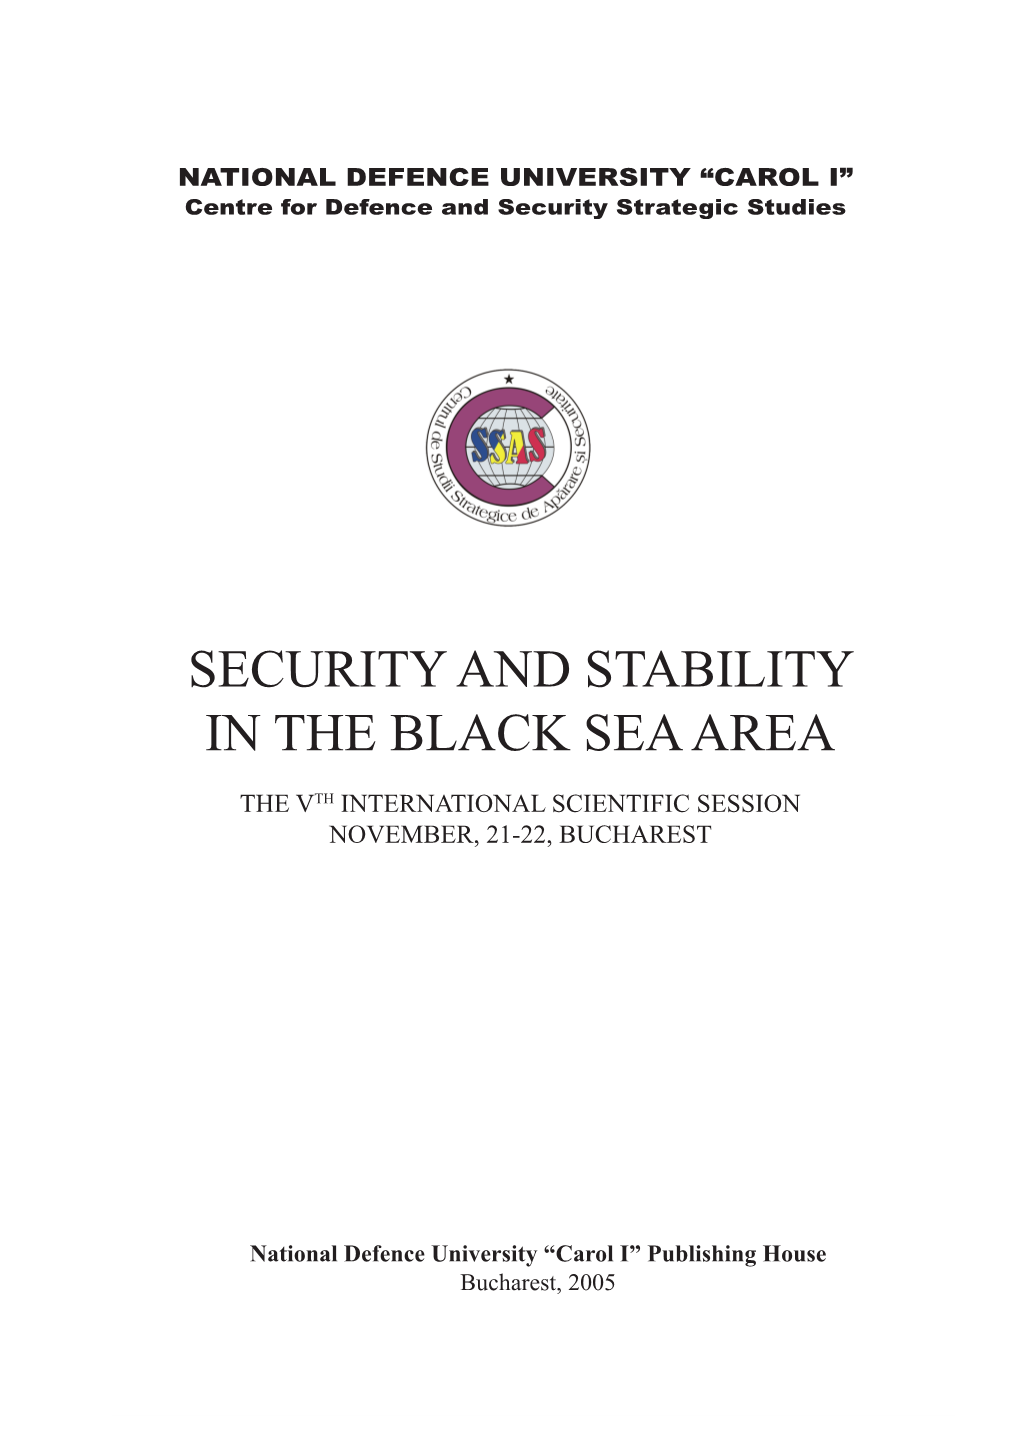 Security and Stability in the Black Sea Area